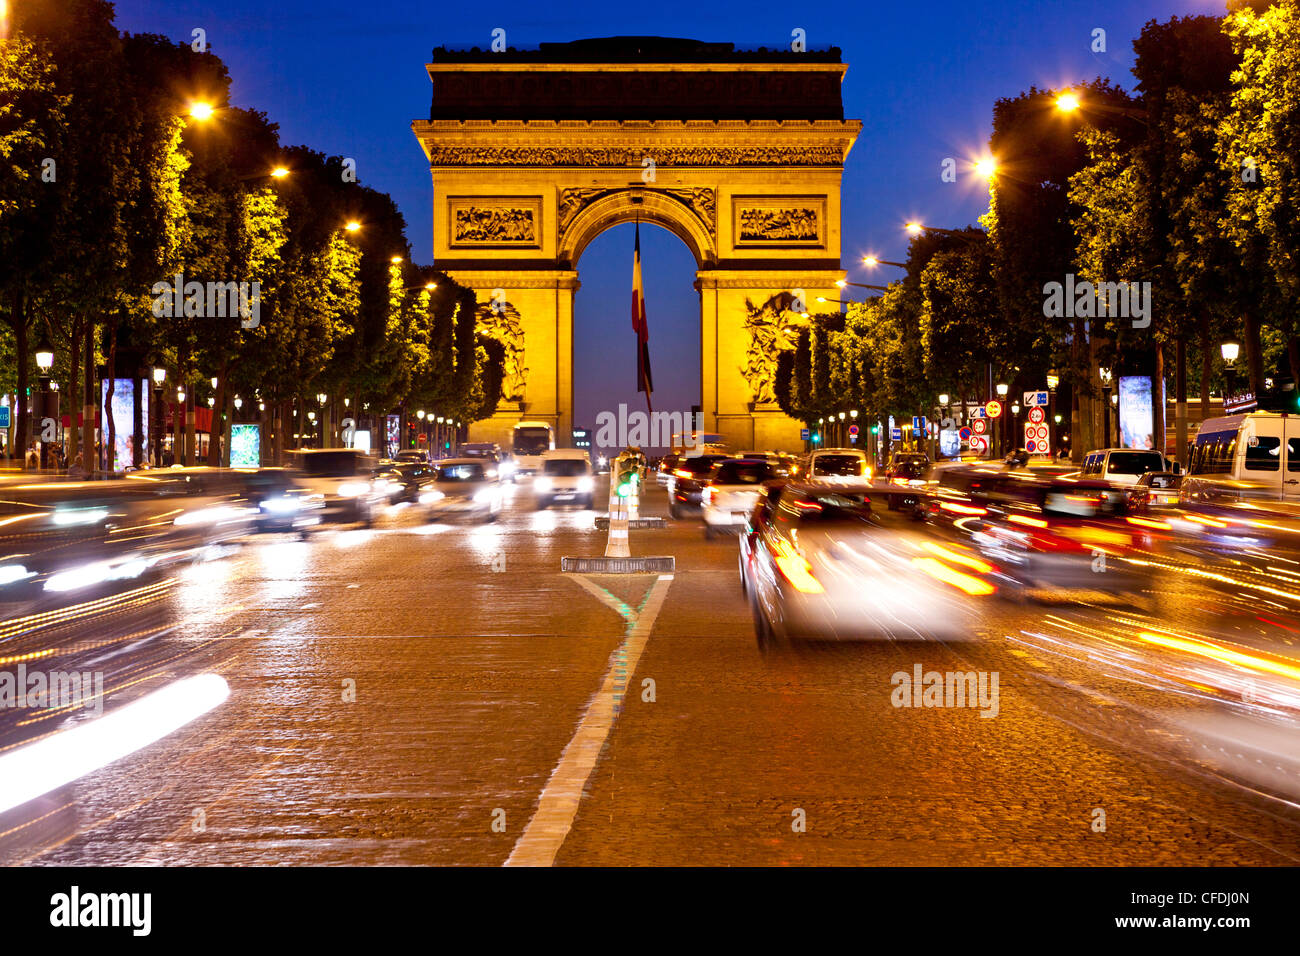 Arc de Triomphe and Champs-Elysees at night, Paris, France, Europe Stock Photo